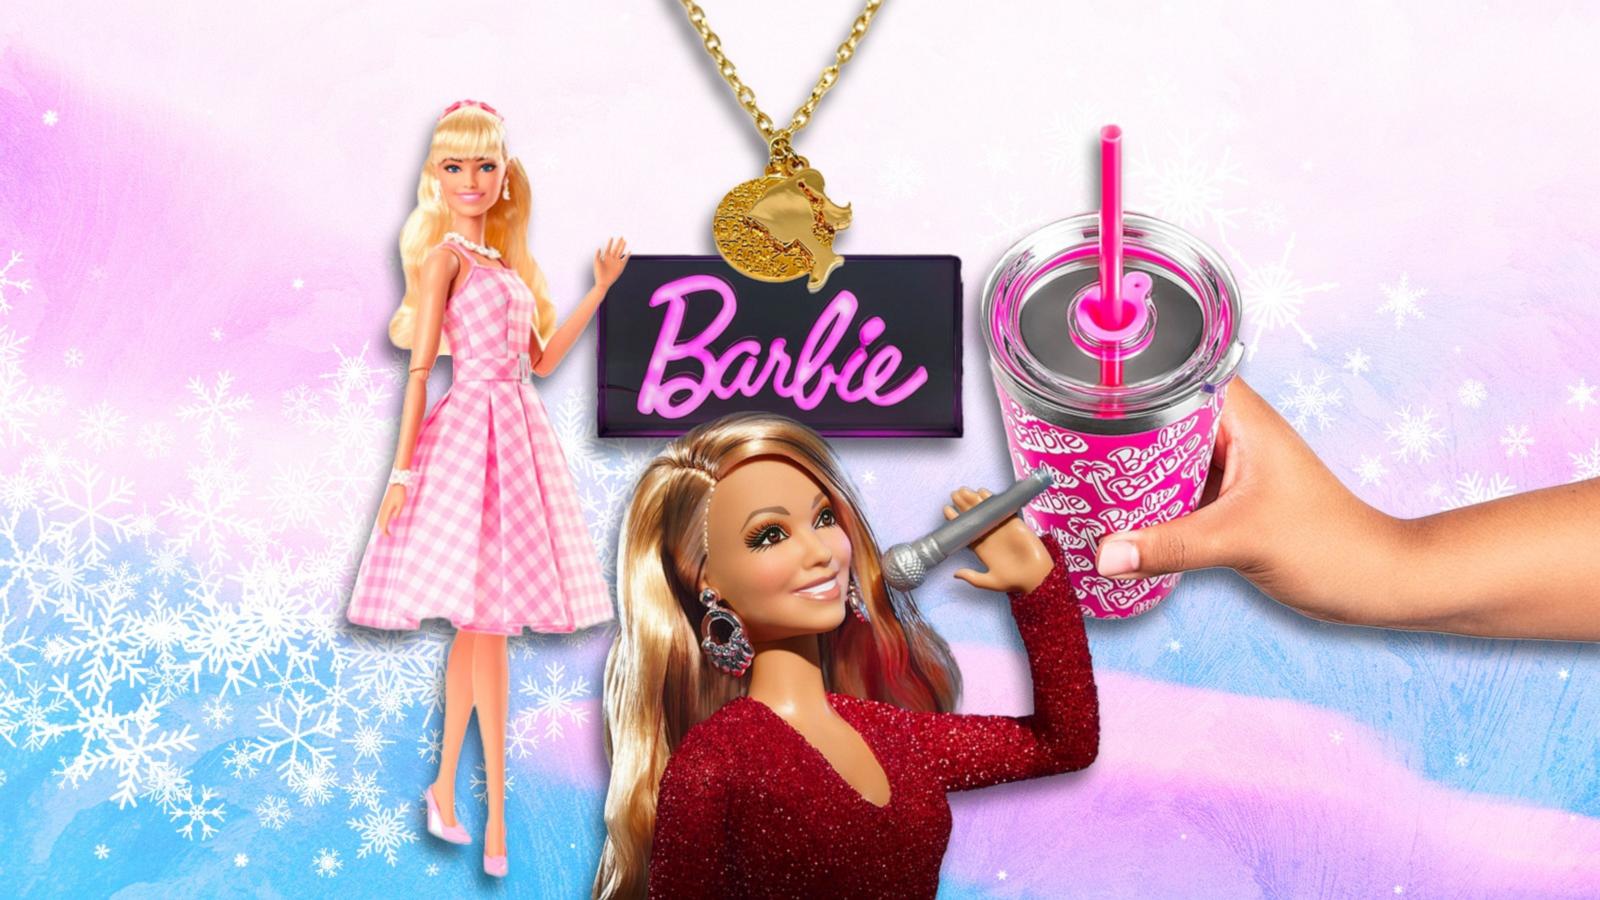 Barbie wine glasses are 20% off on Prime Day, but not for long